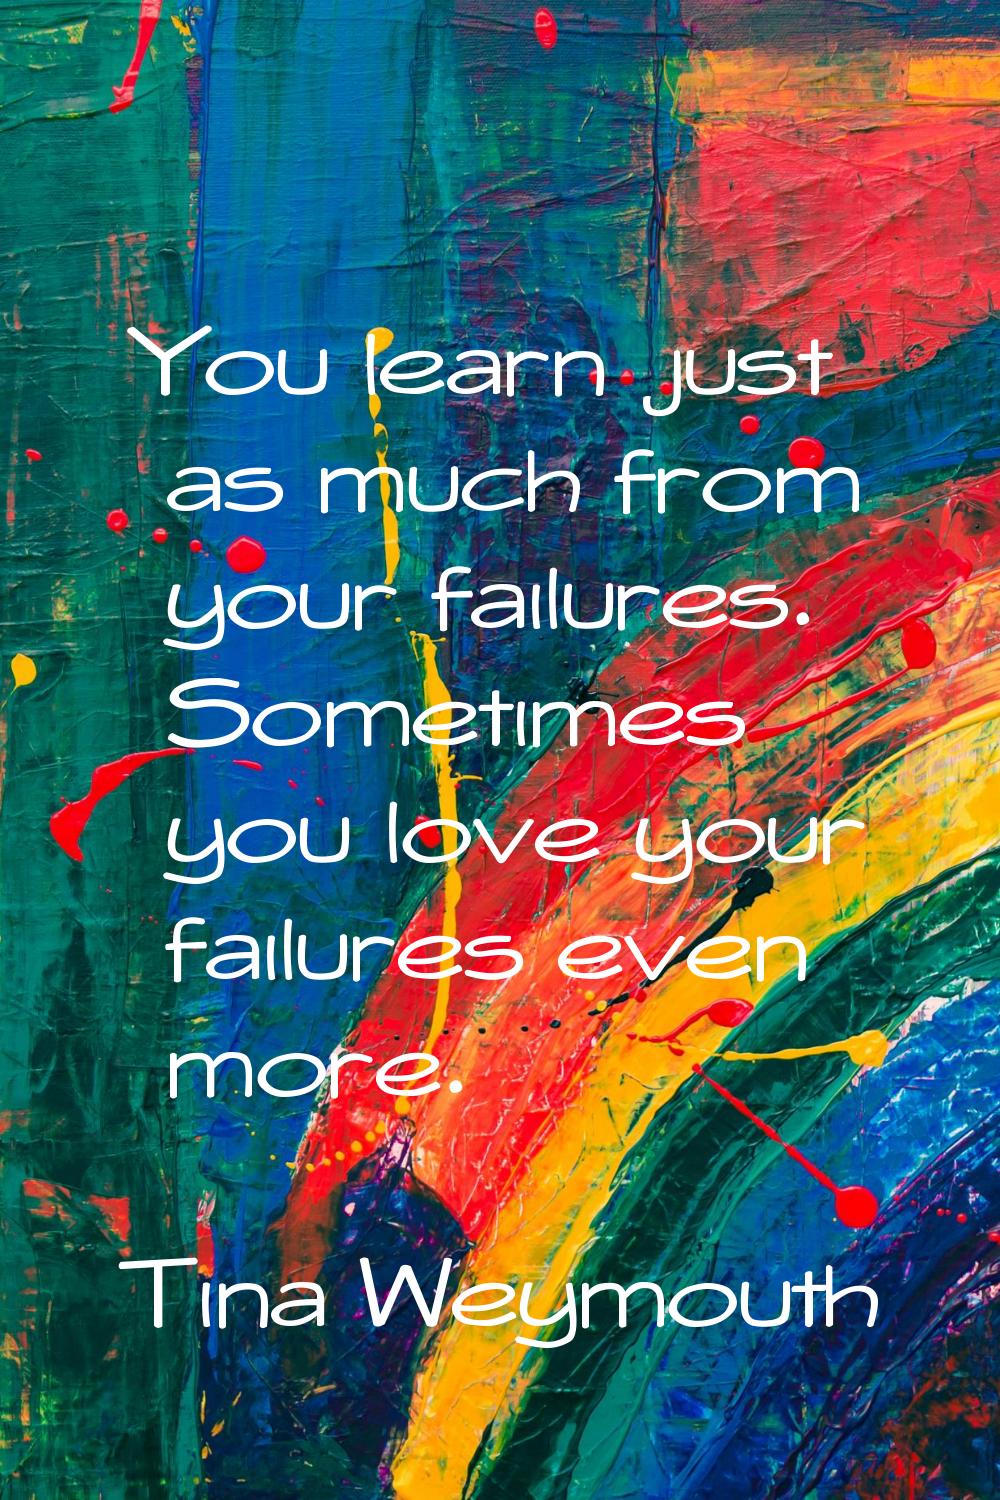 You learn just as much from your failures. Sometimes you love your failures even more.